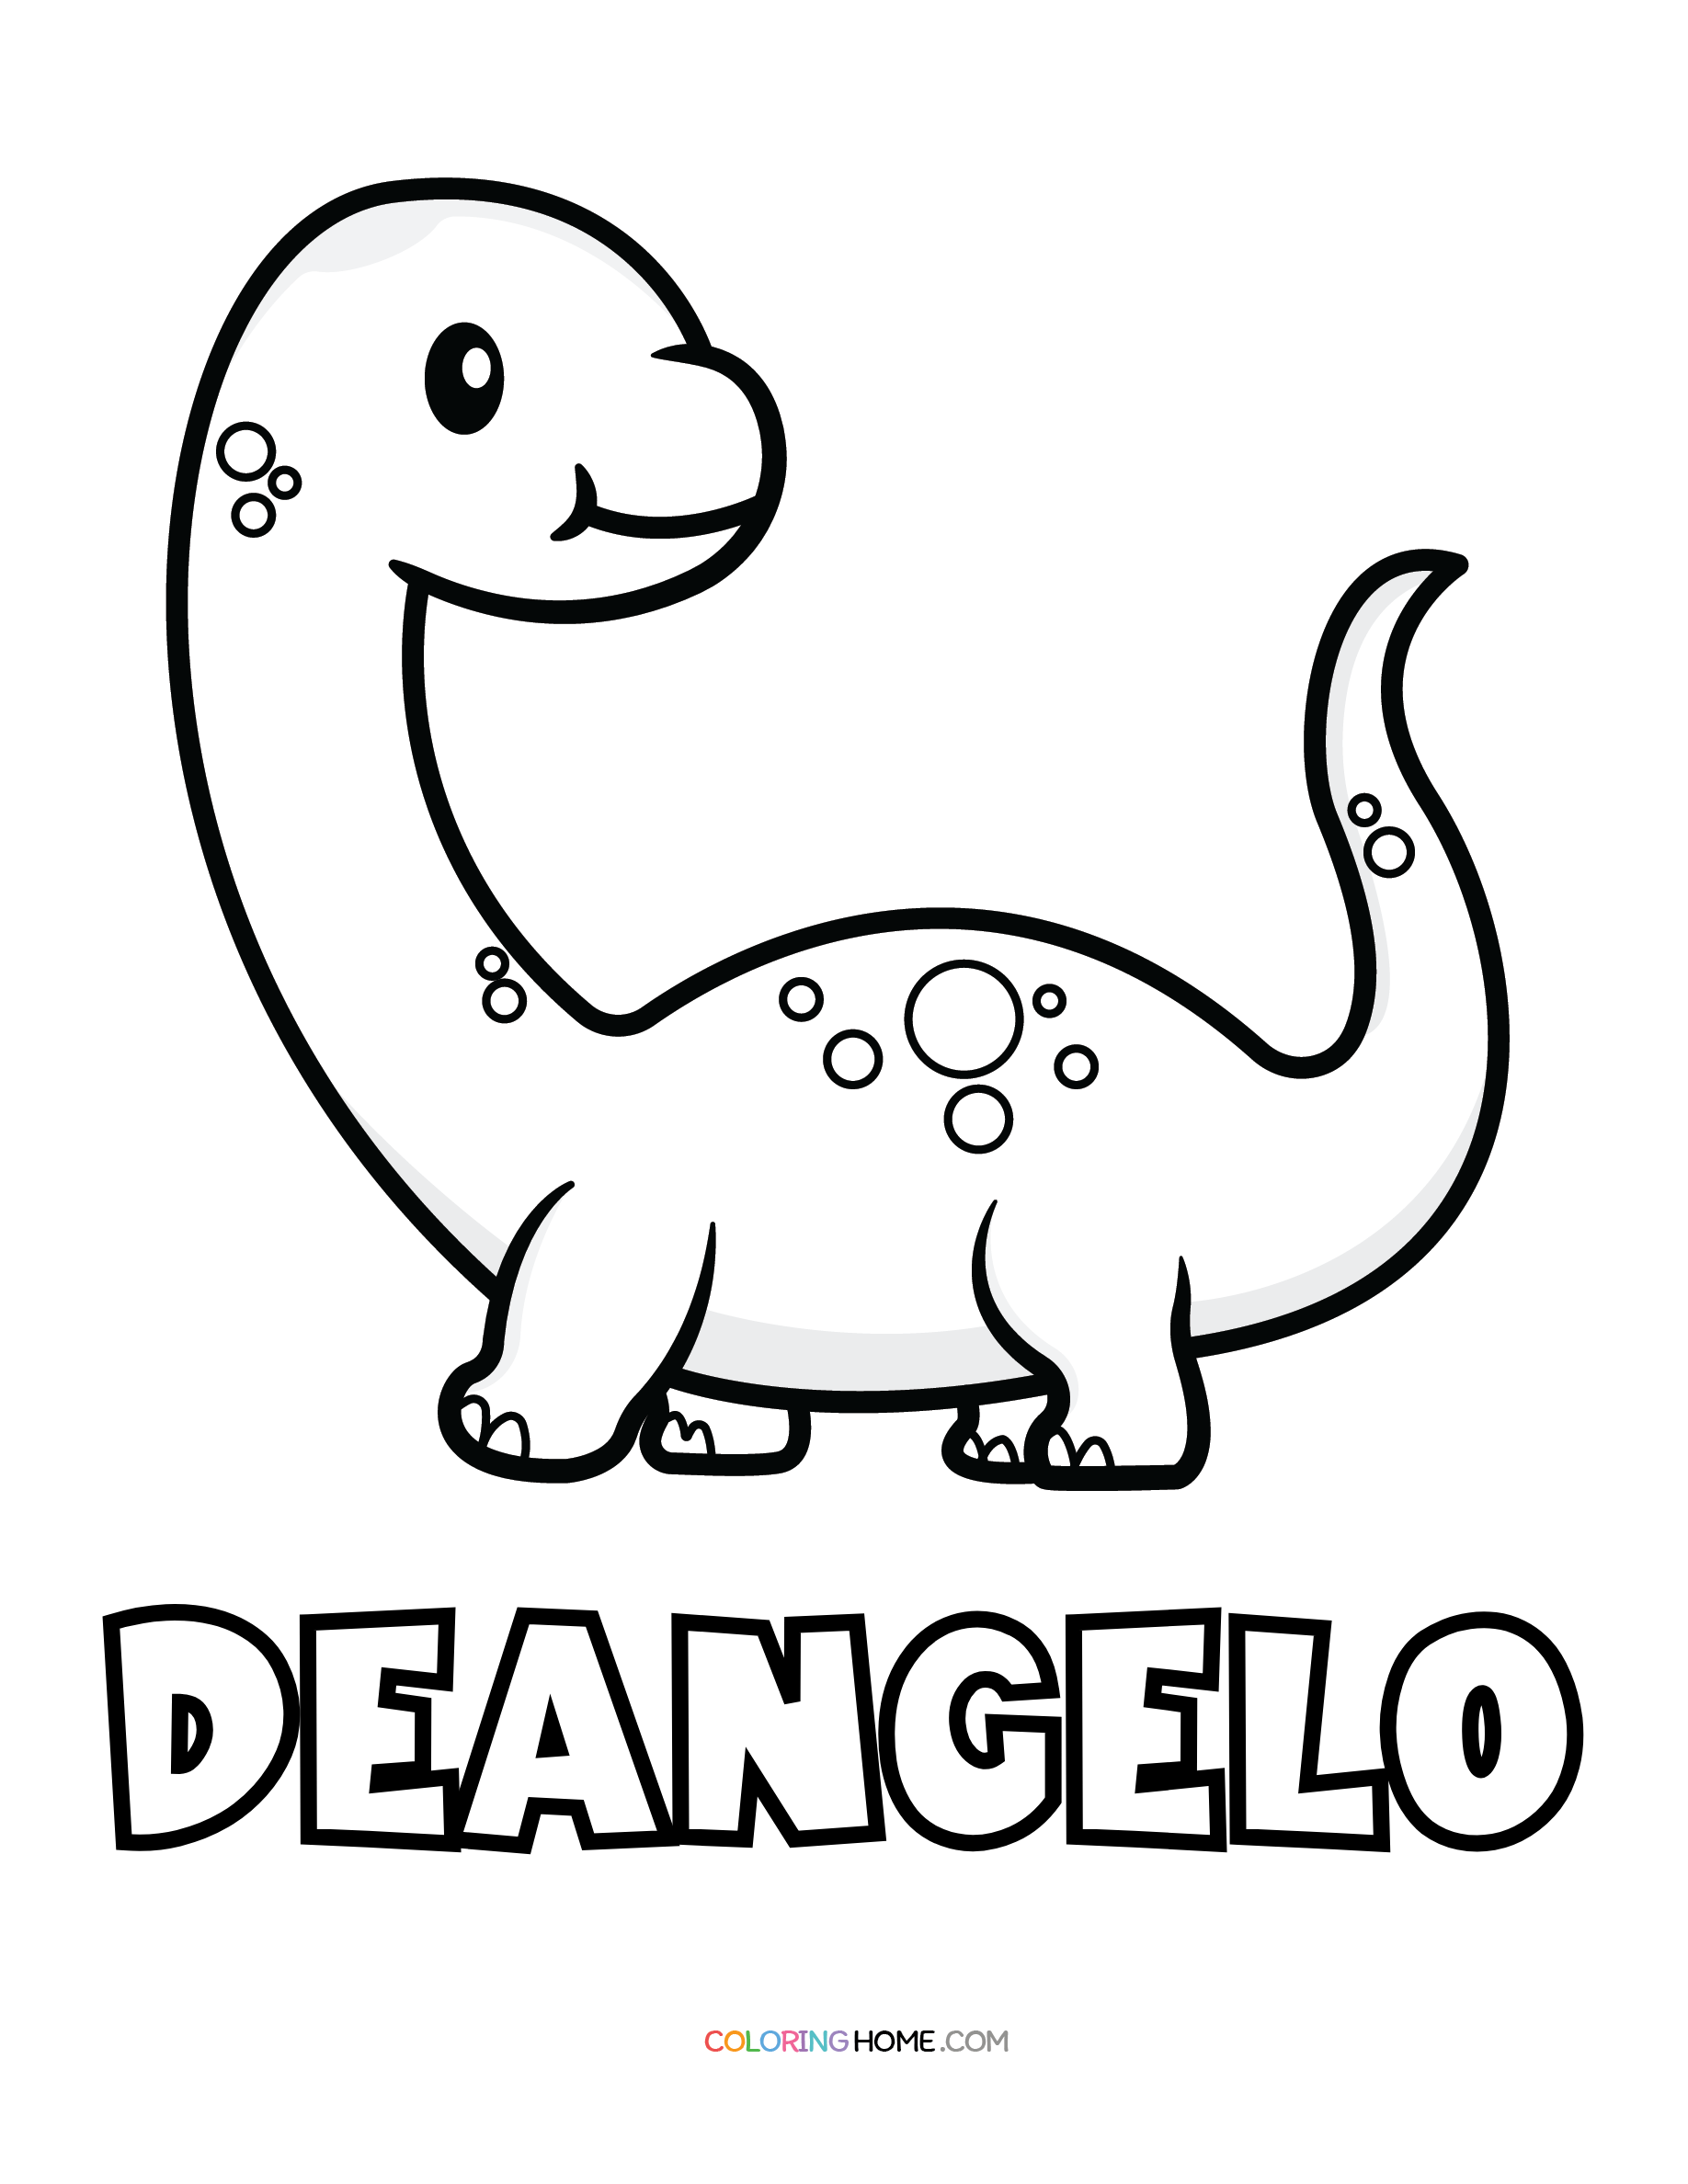 Deangelo dinosaur coloring page